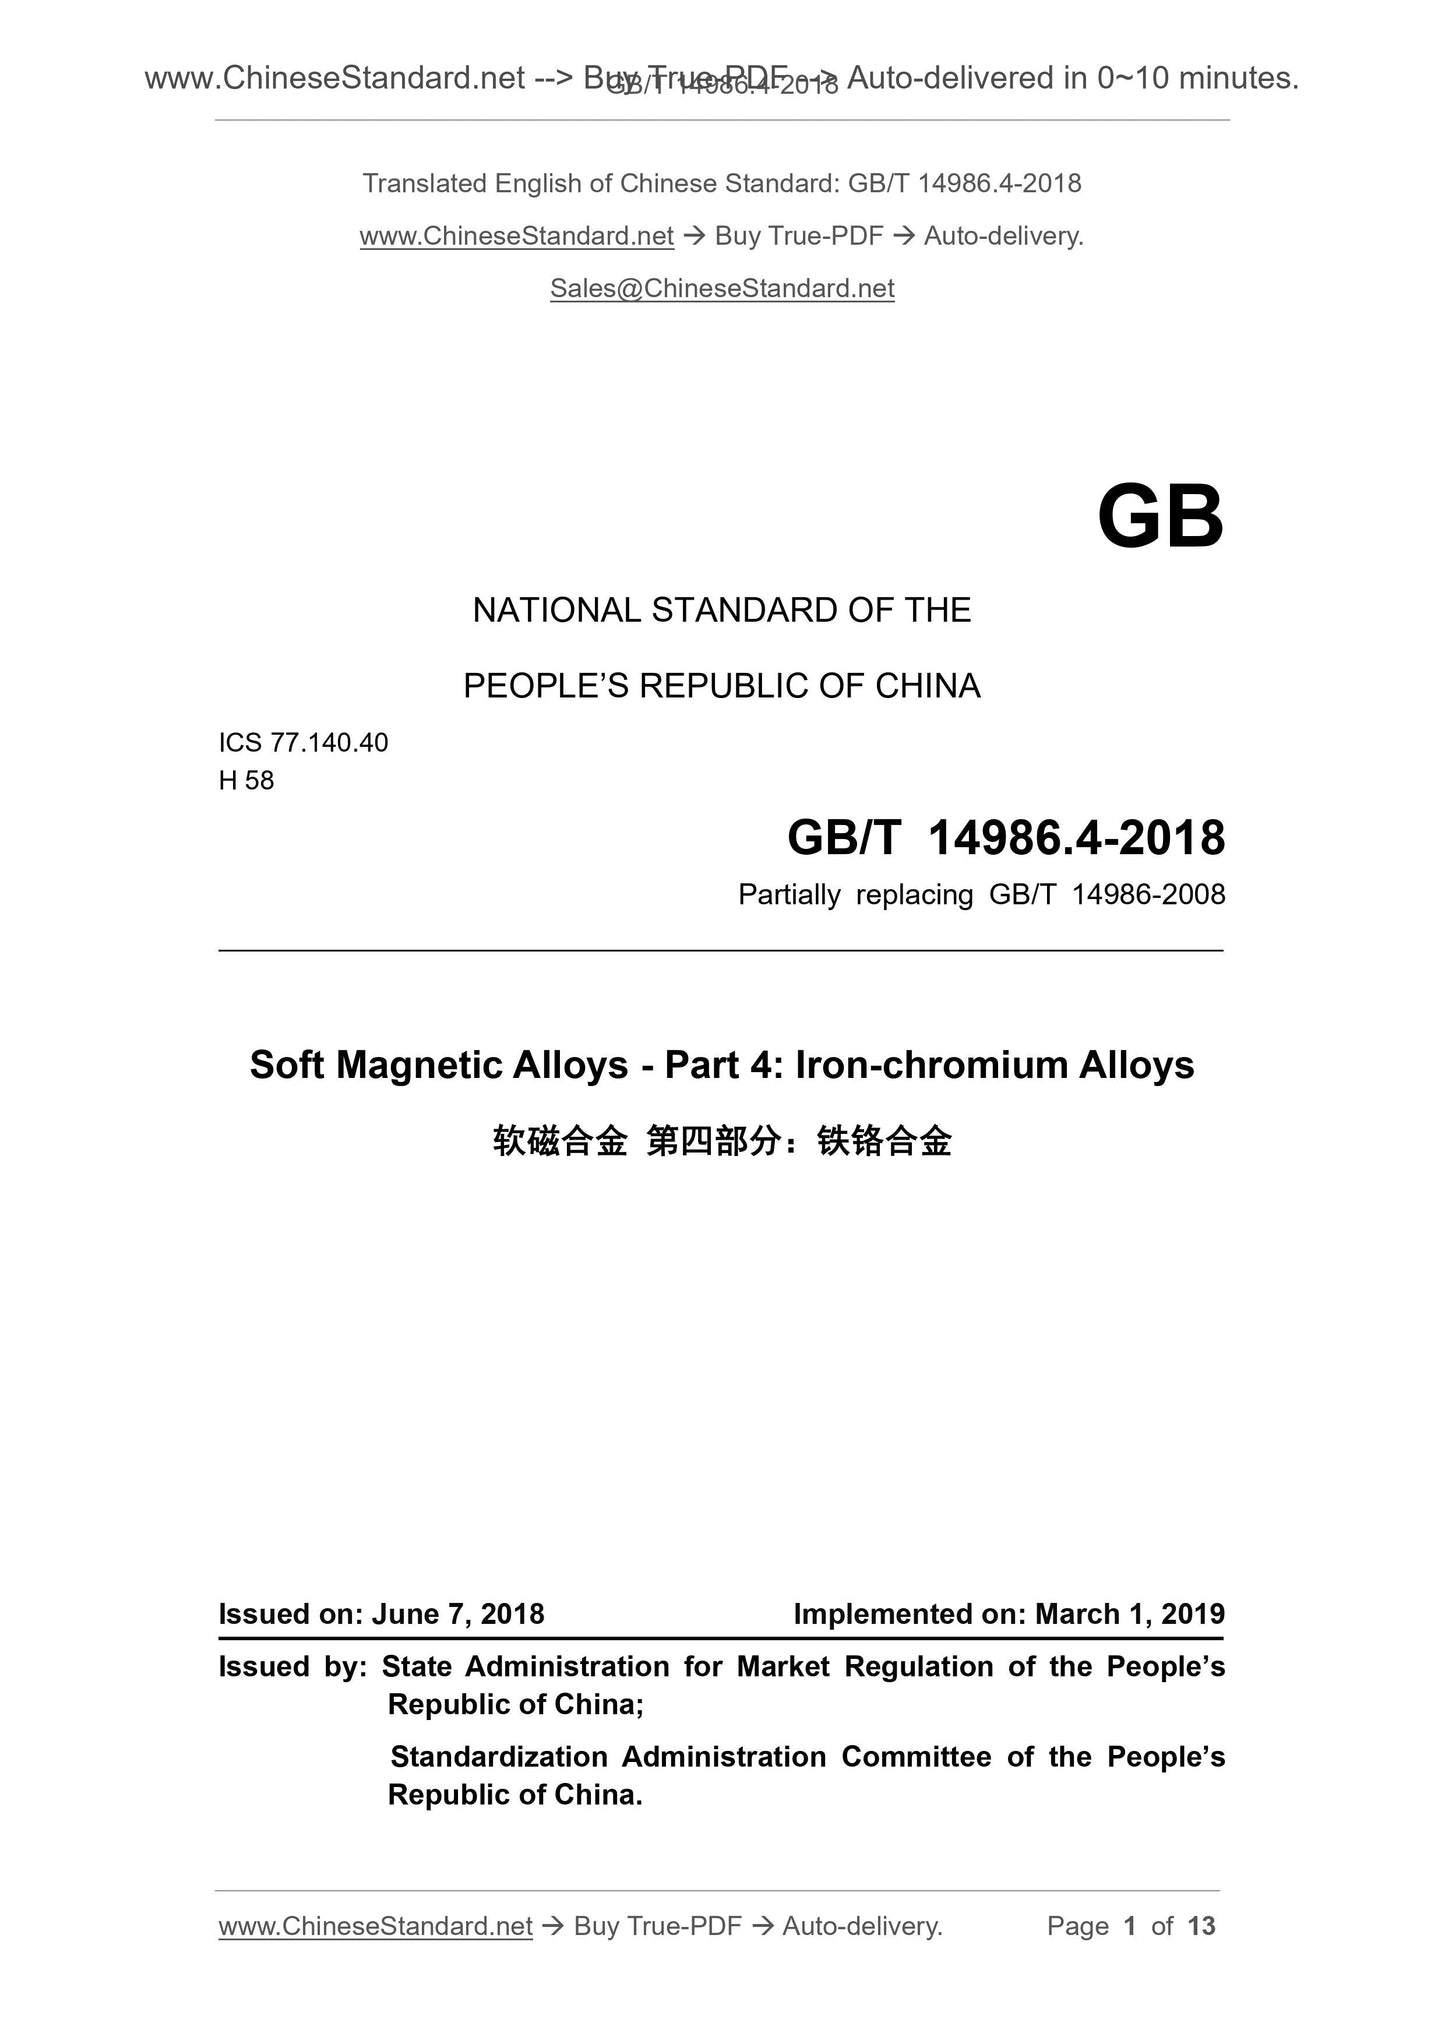 GB/T 14986.4-2018 Page 1